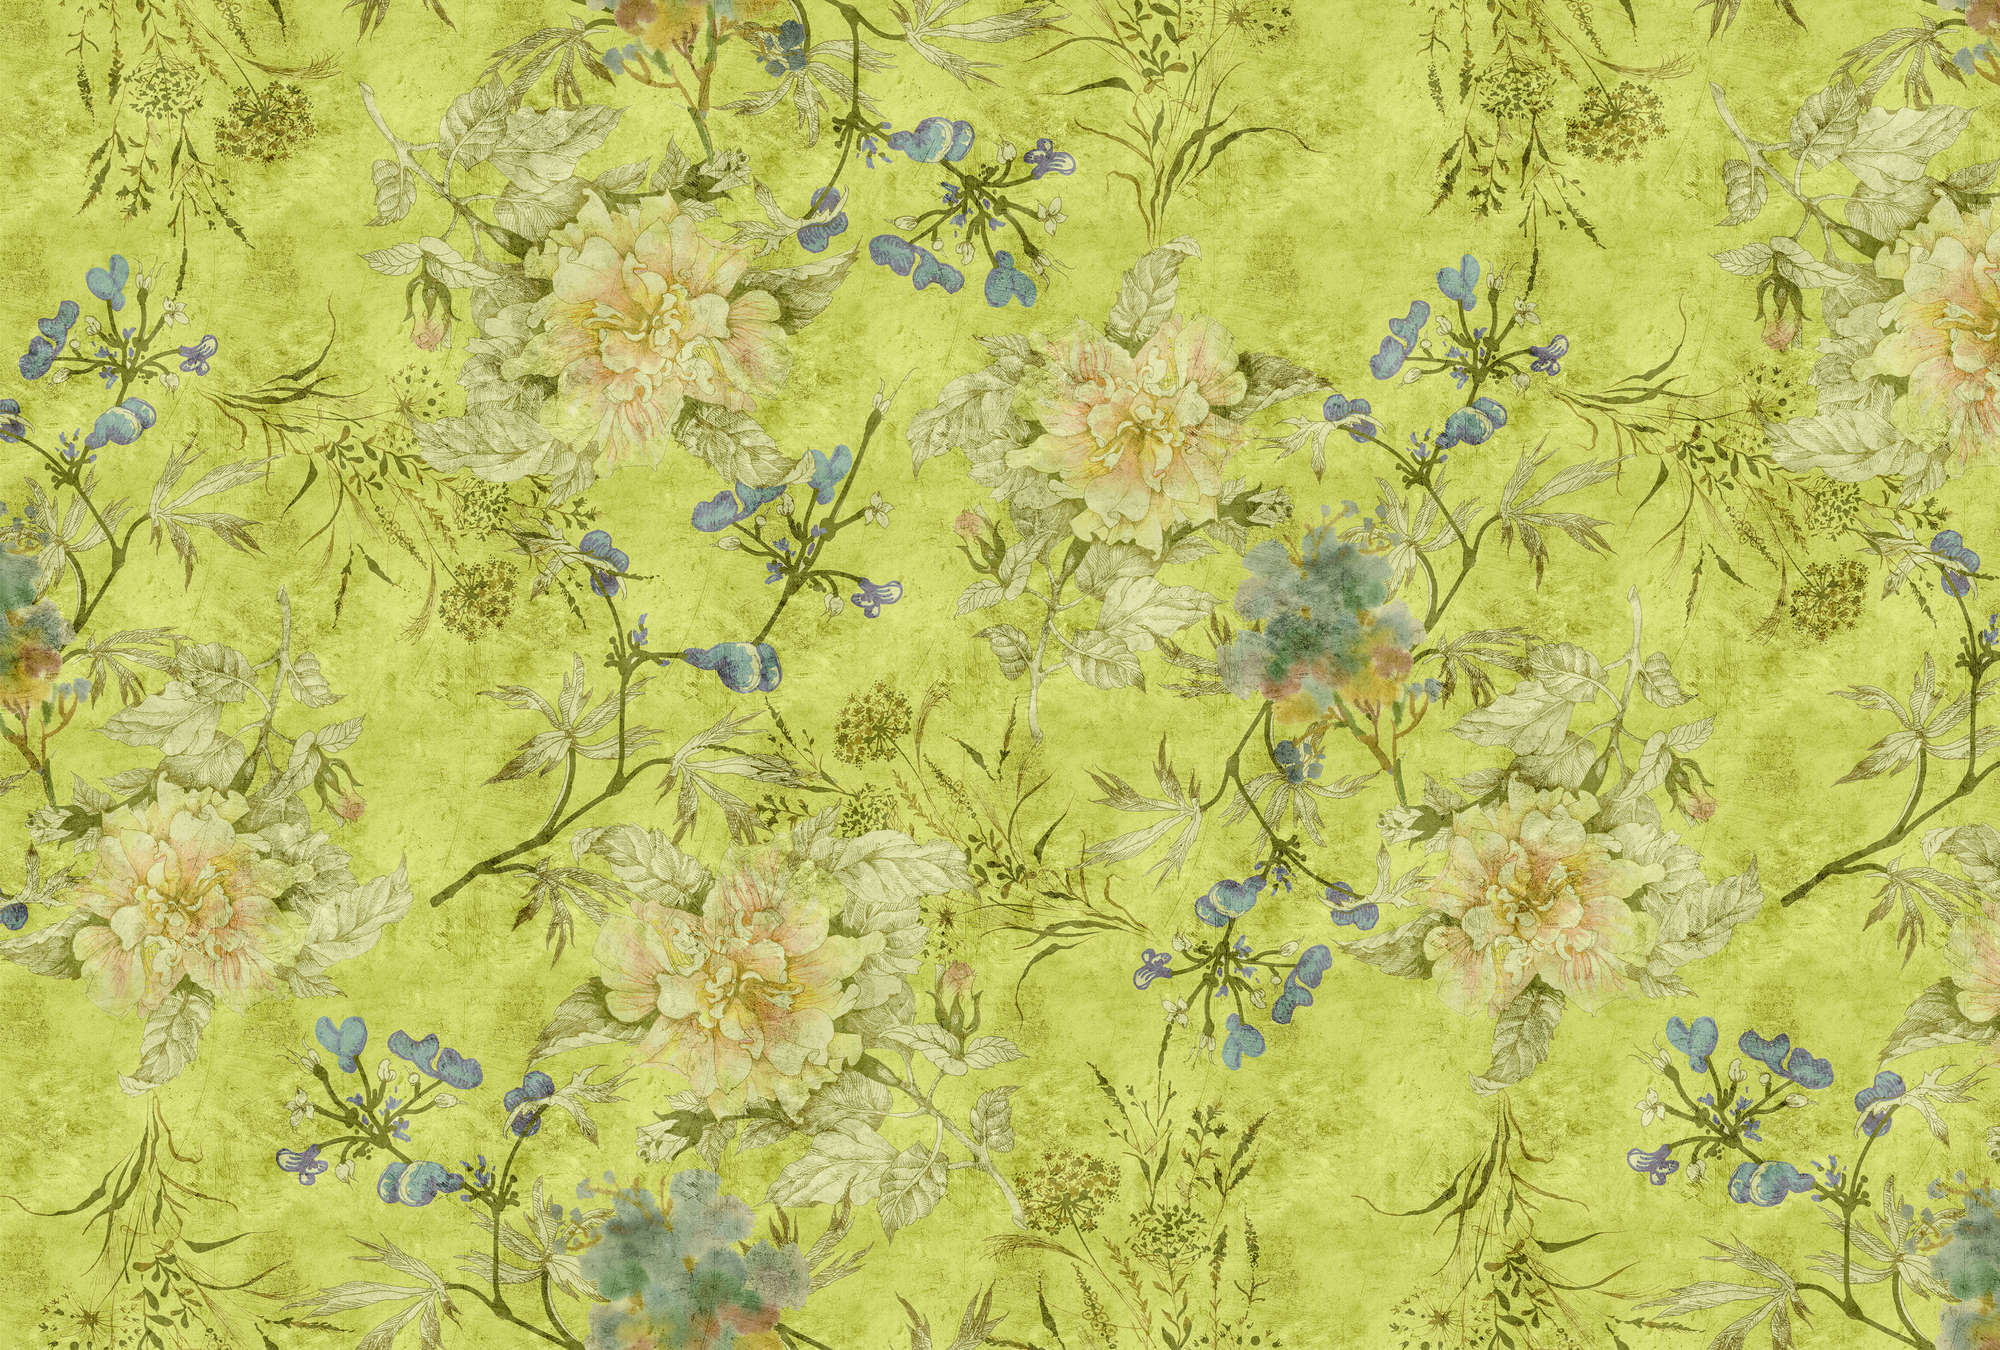             Tenderblossom 1 - Photo wallpaper with modern flower tendrils in a scratchy structure - Green | Pearl smooth non-woven
        